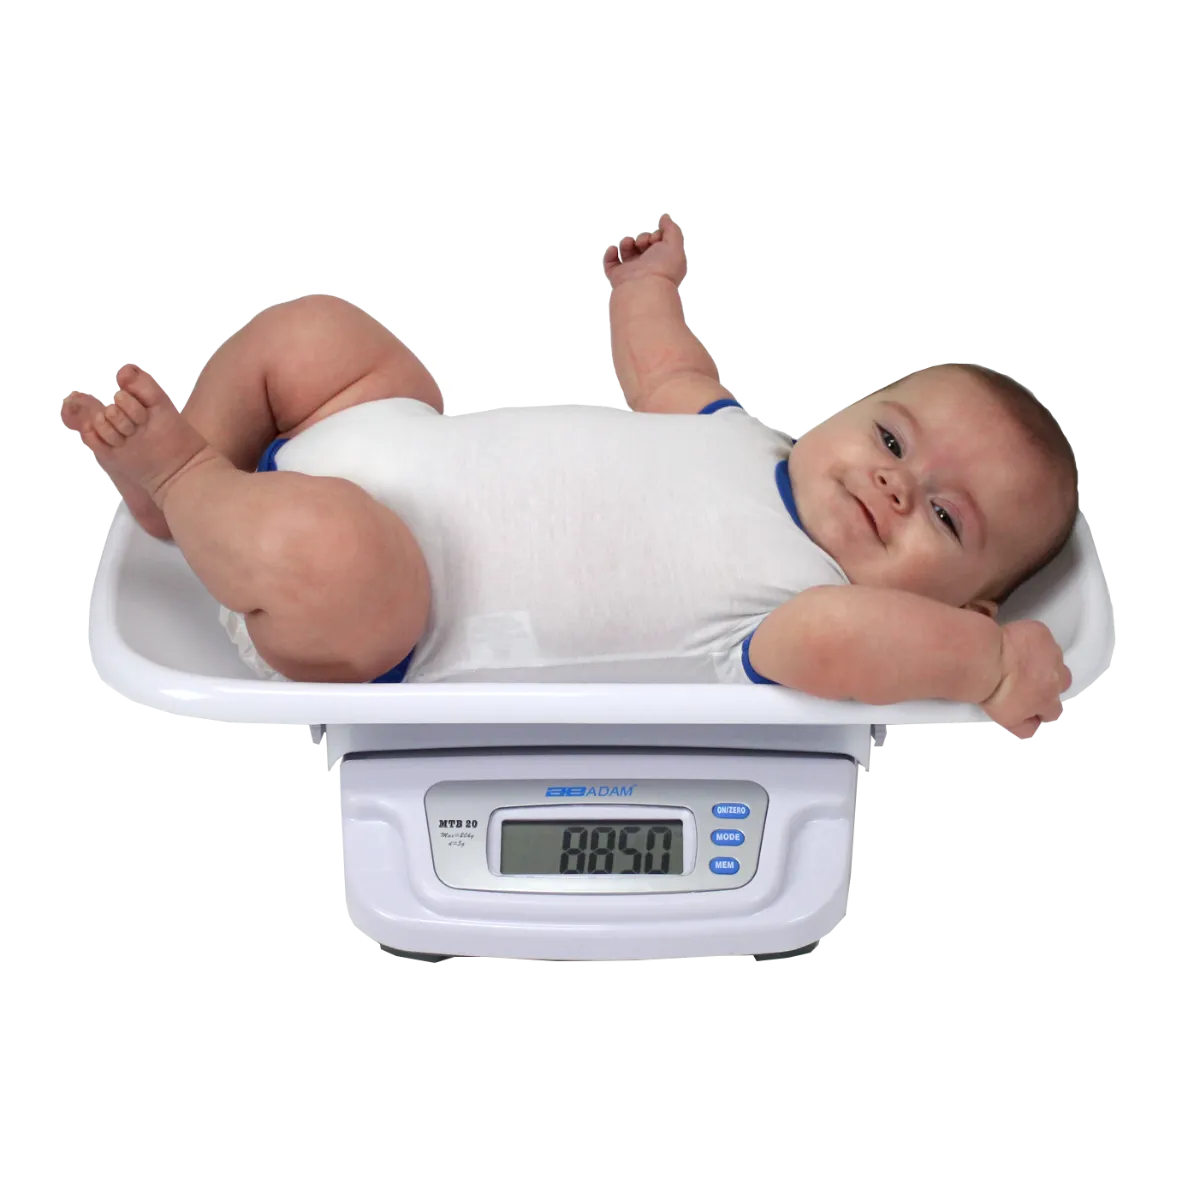 Baby on the Adam Equipment scale for babies with cradle